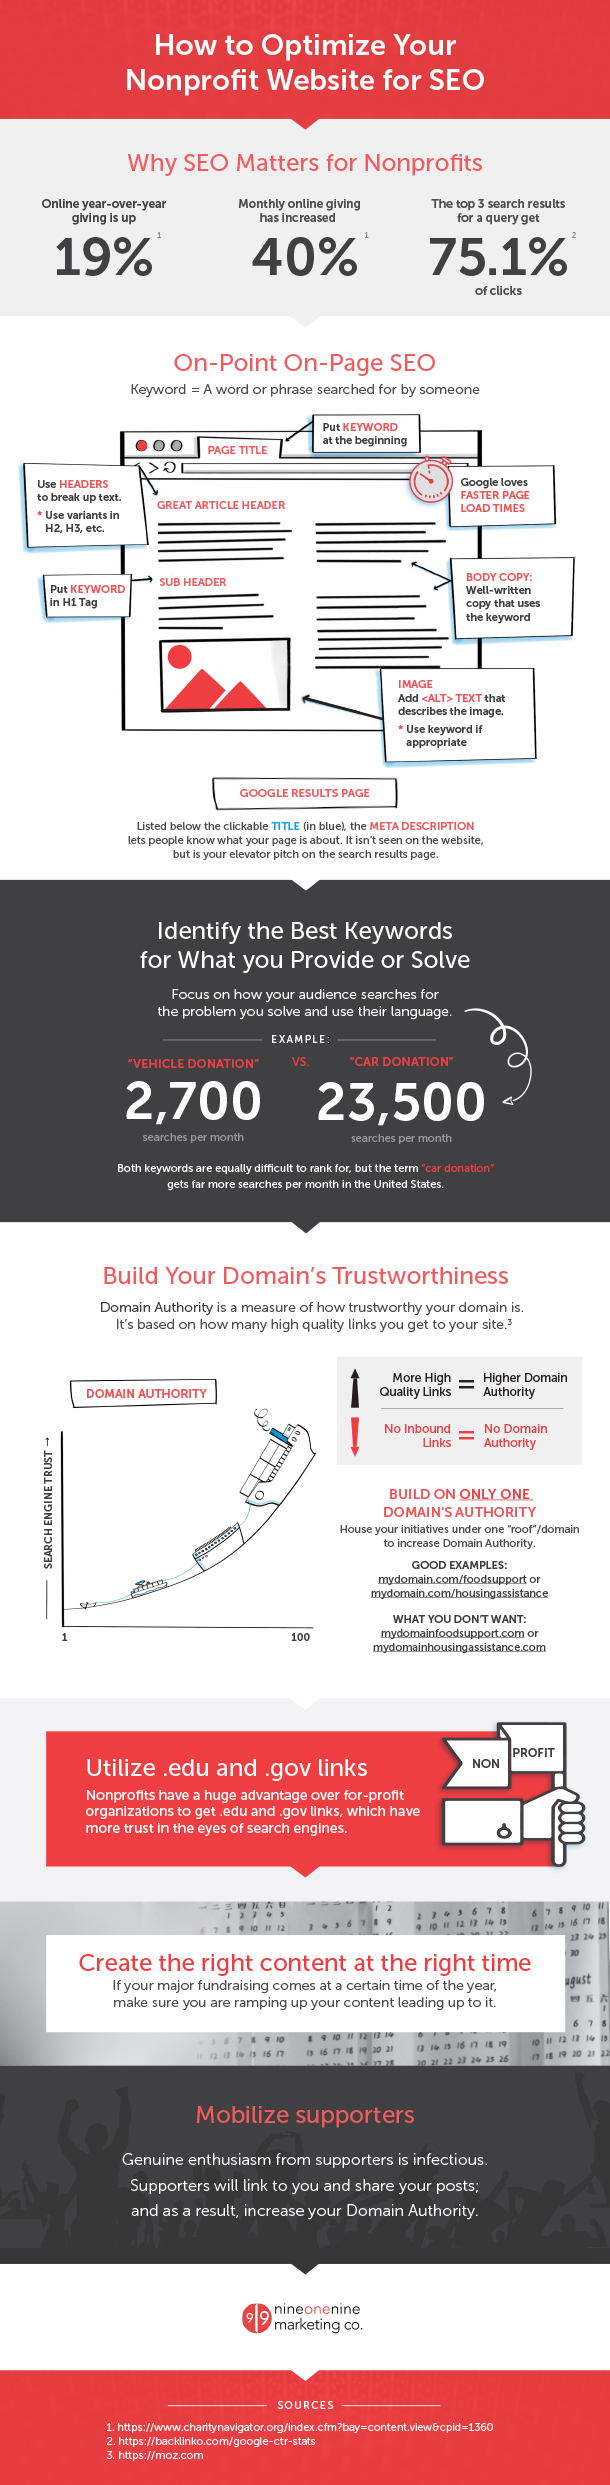 a quick guide to seo for non profits infographic